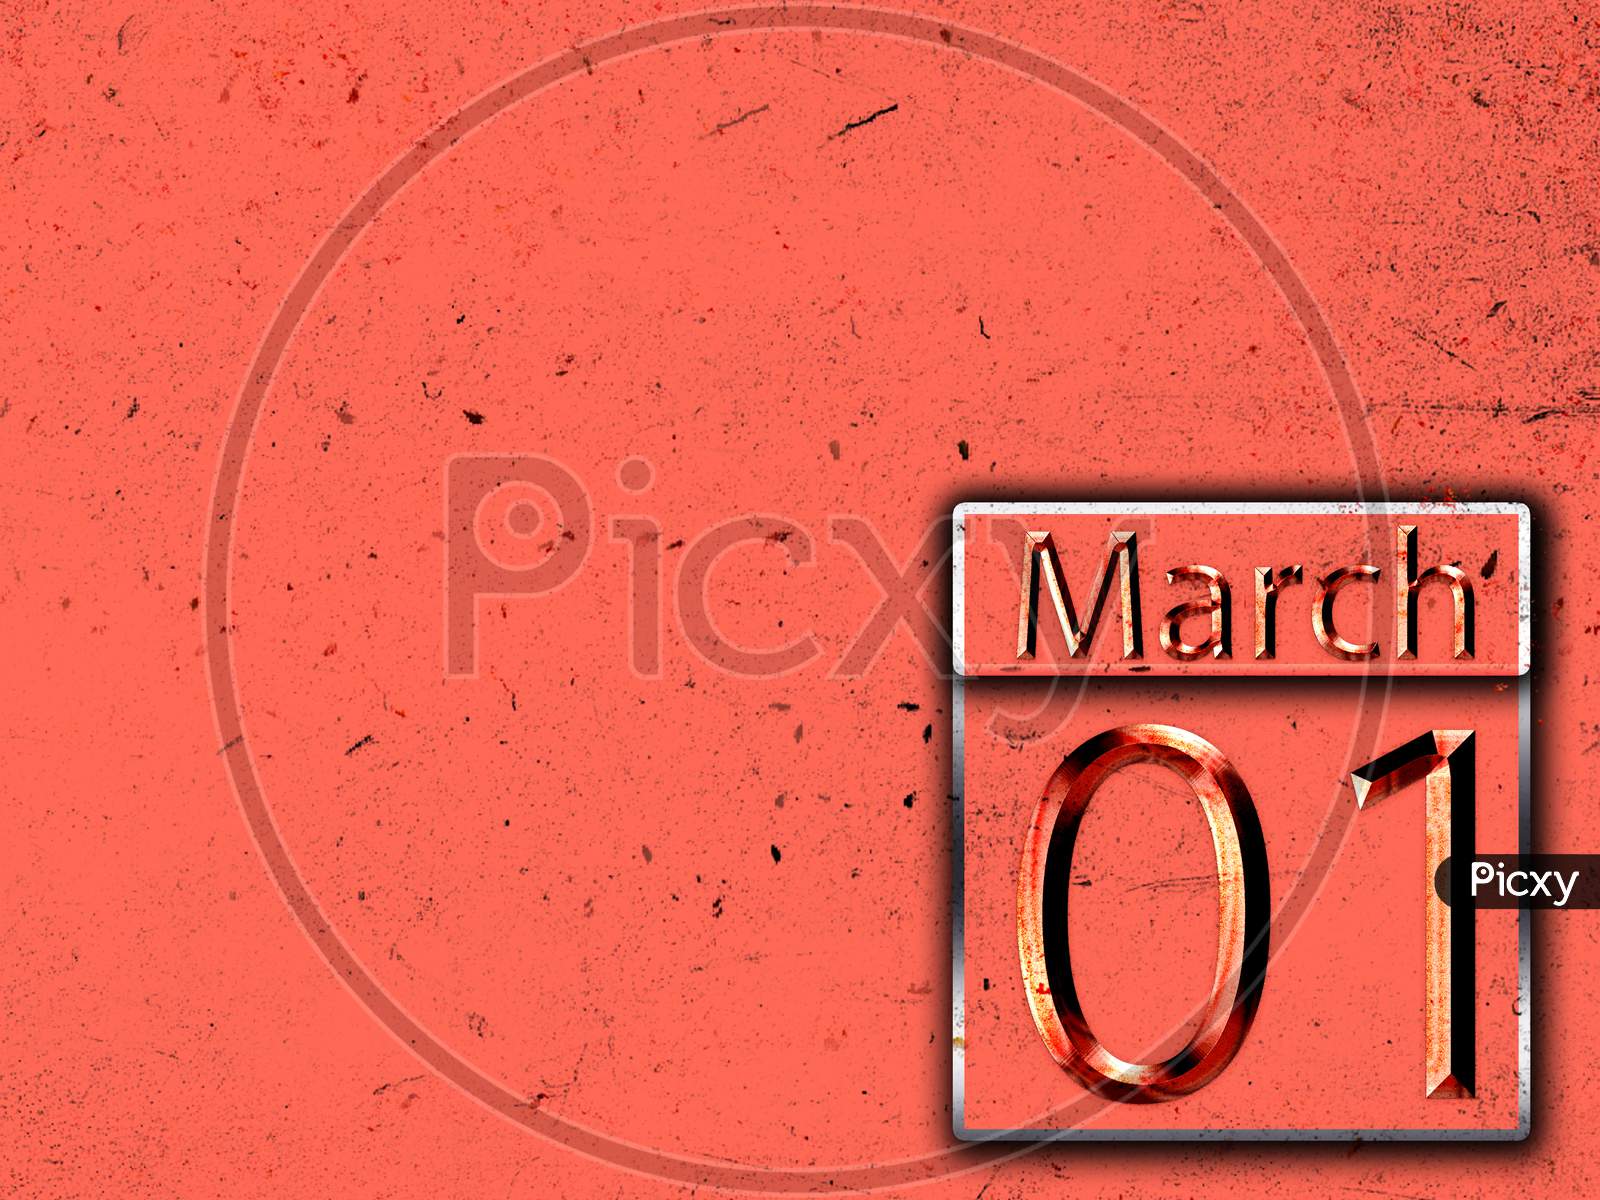 01 March, Monthly Calendar On Backgrand